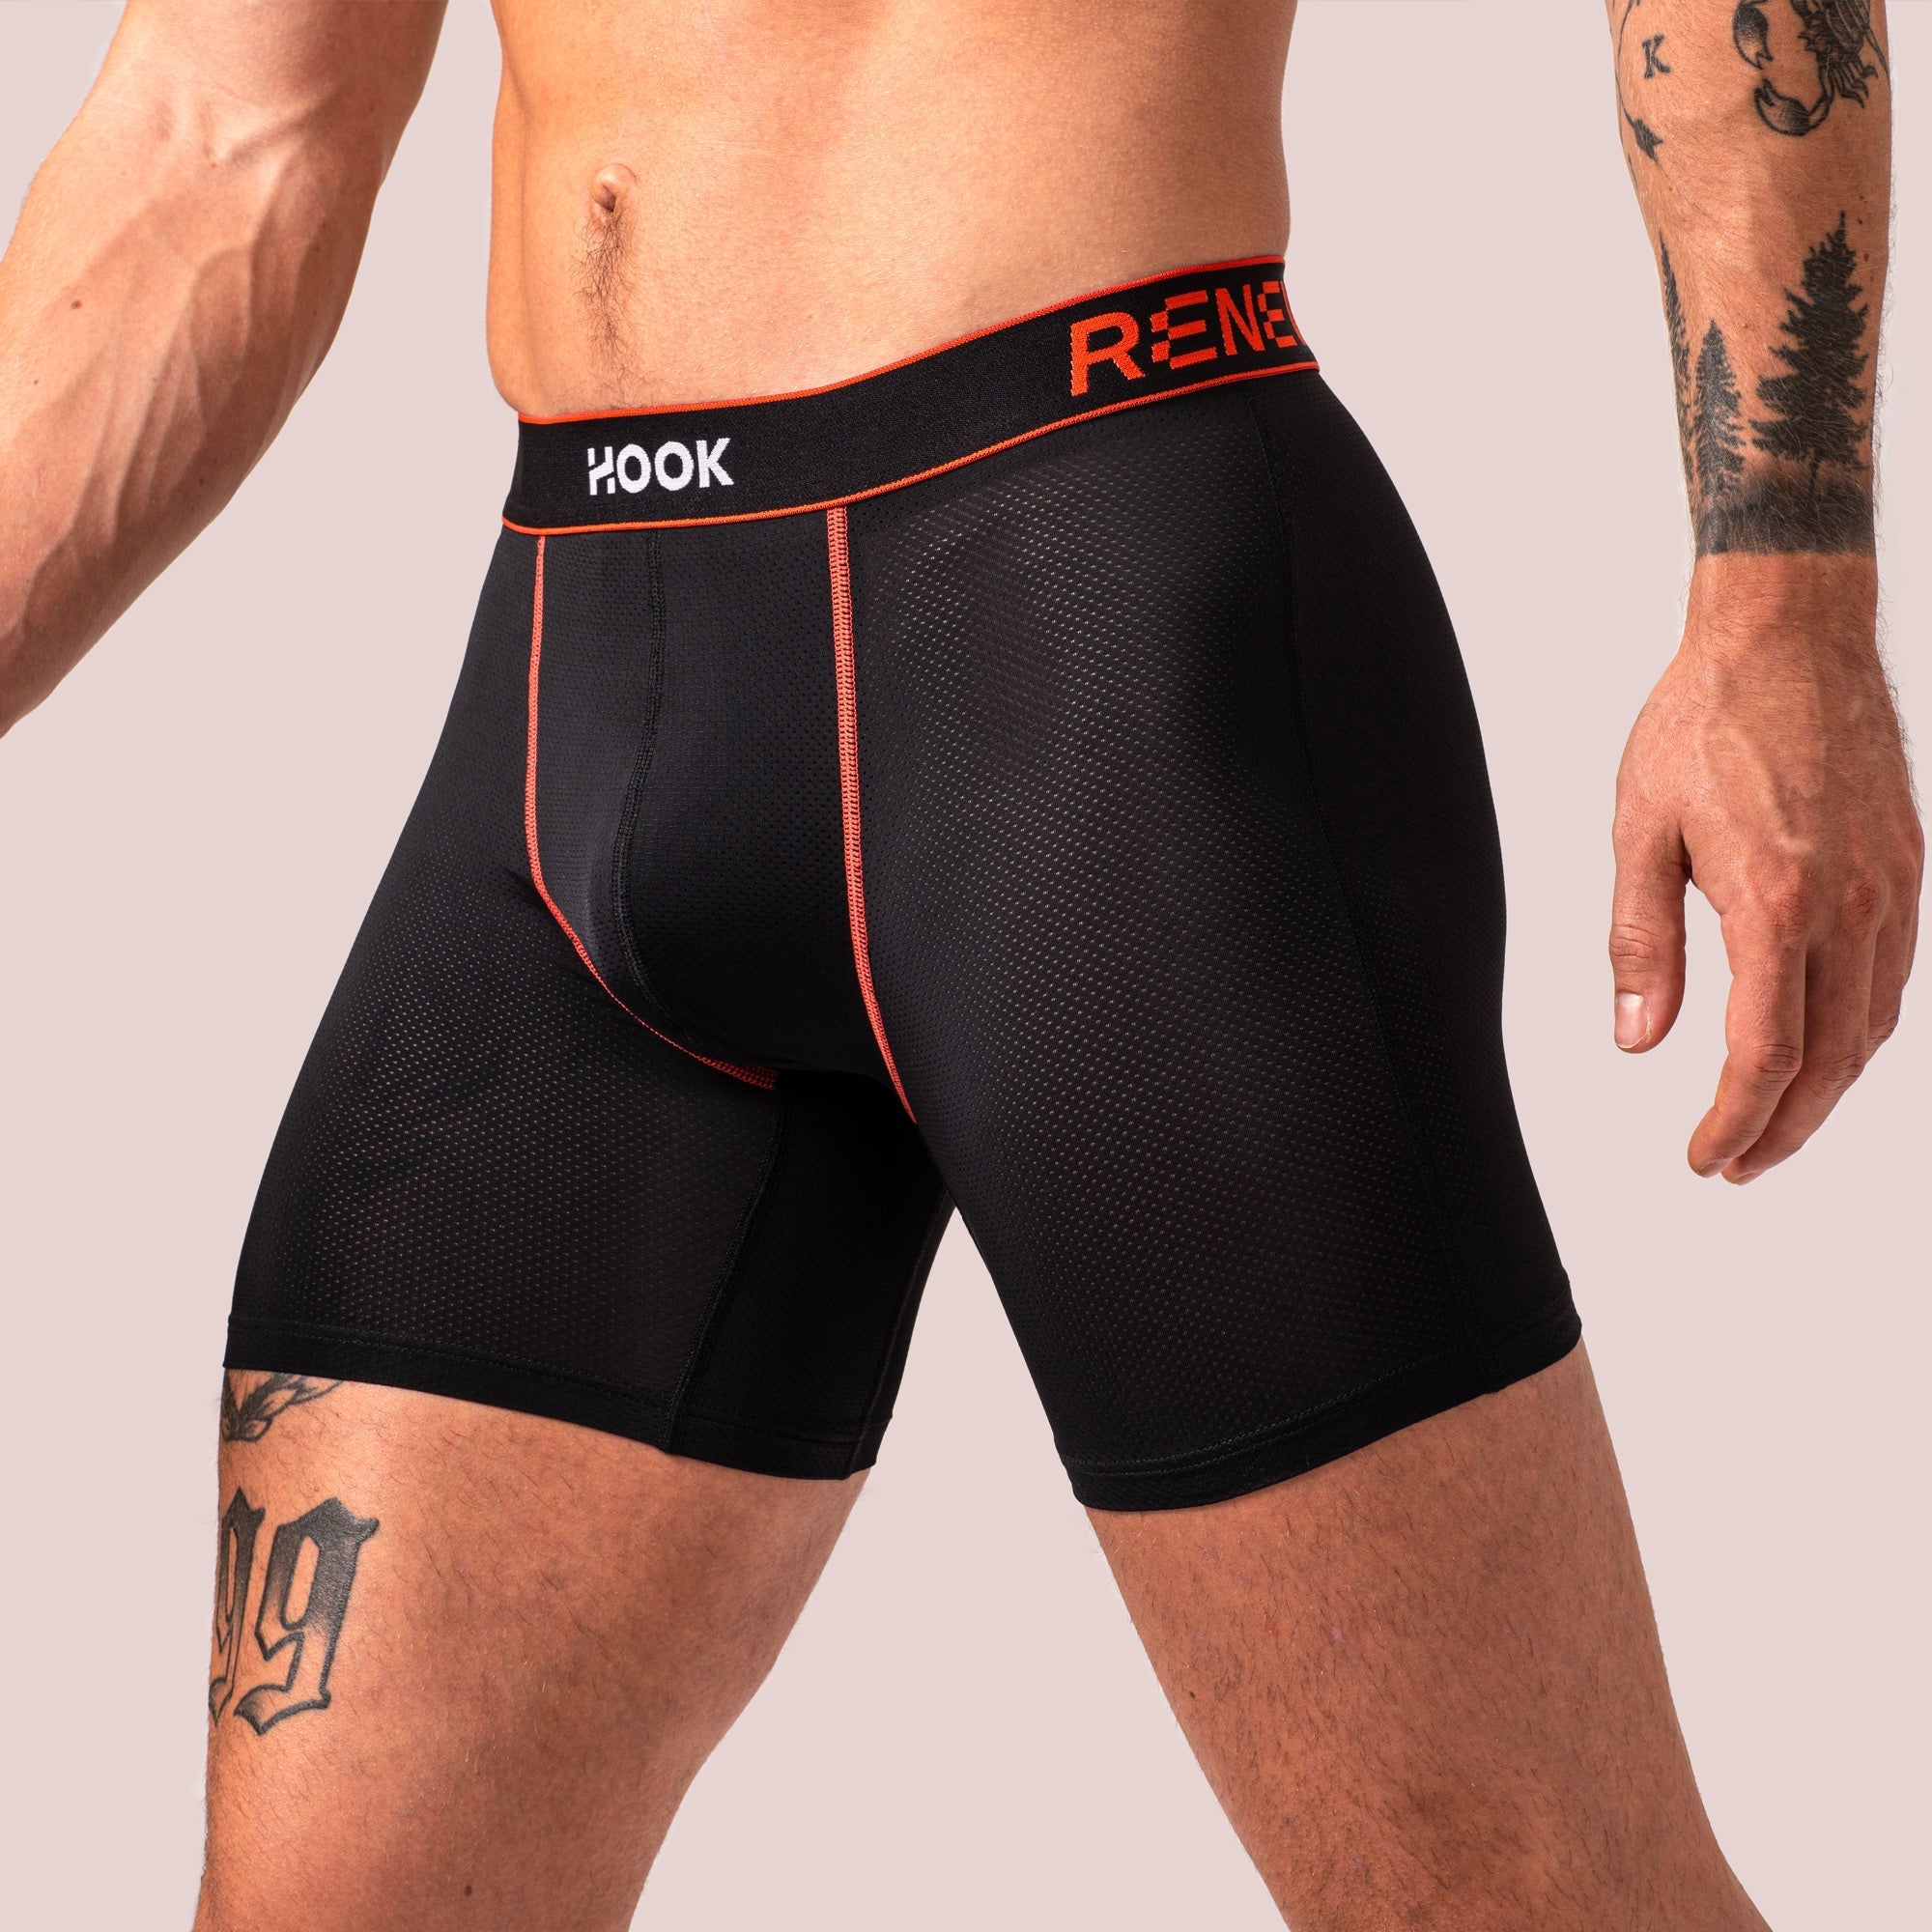 Renew Boxer Brief : Blue 3 pack